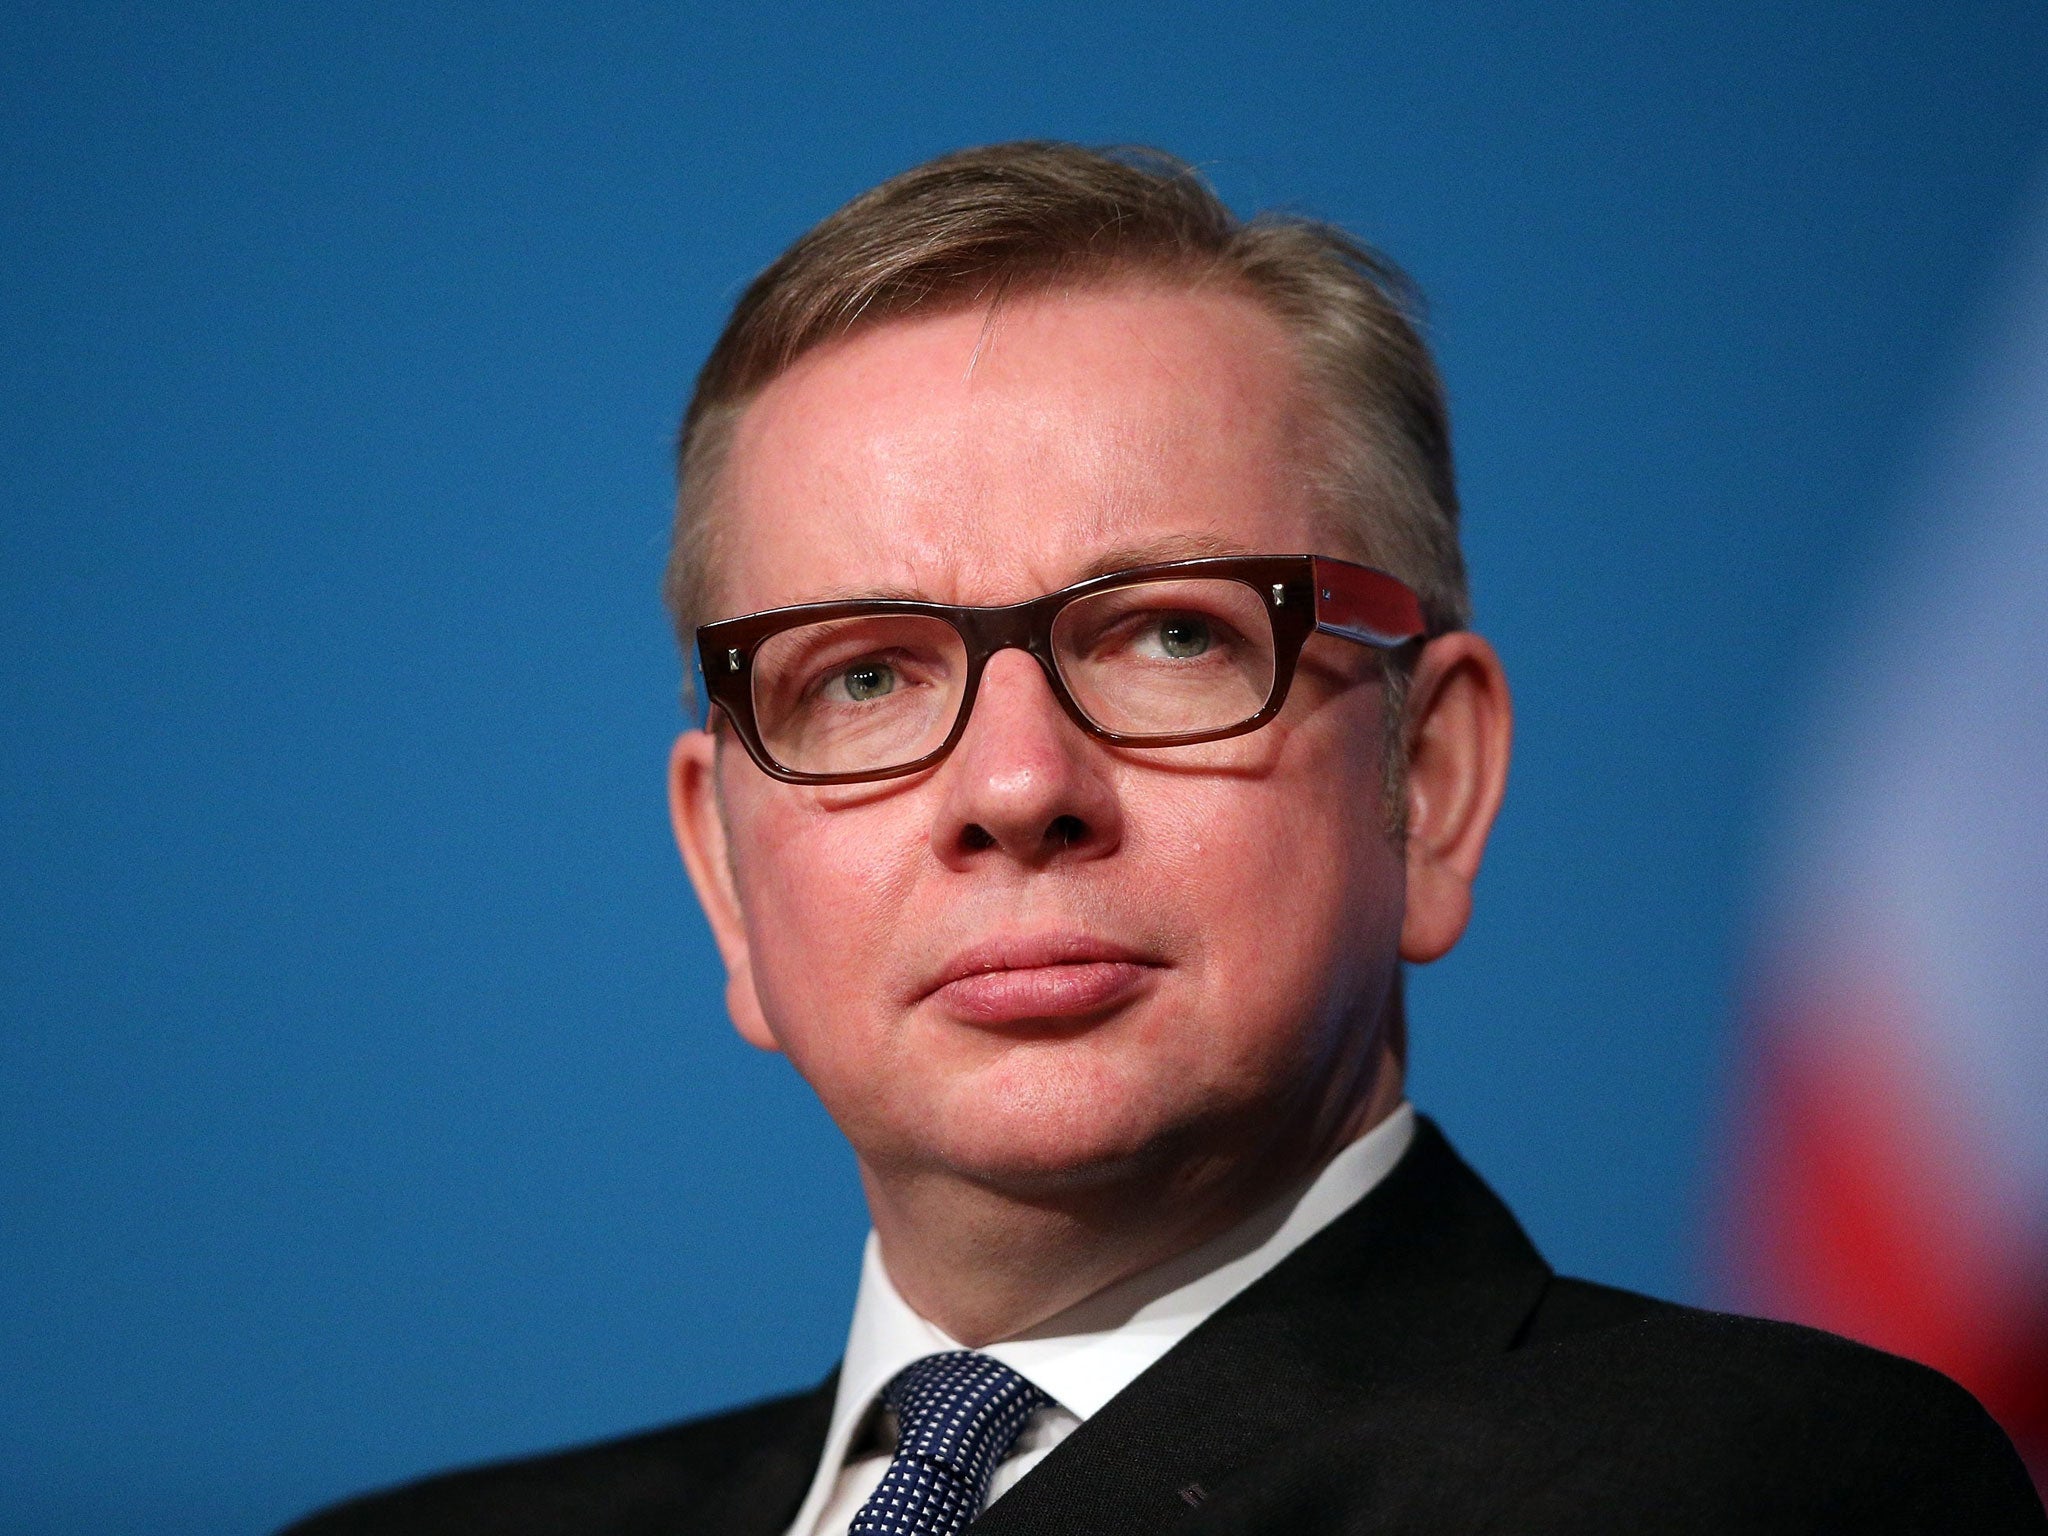 Education Secretary Michael Gove spent four months in care as a baby before he was adopted